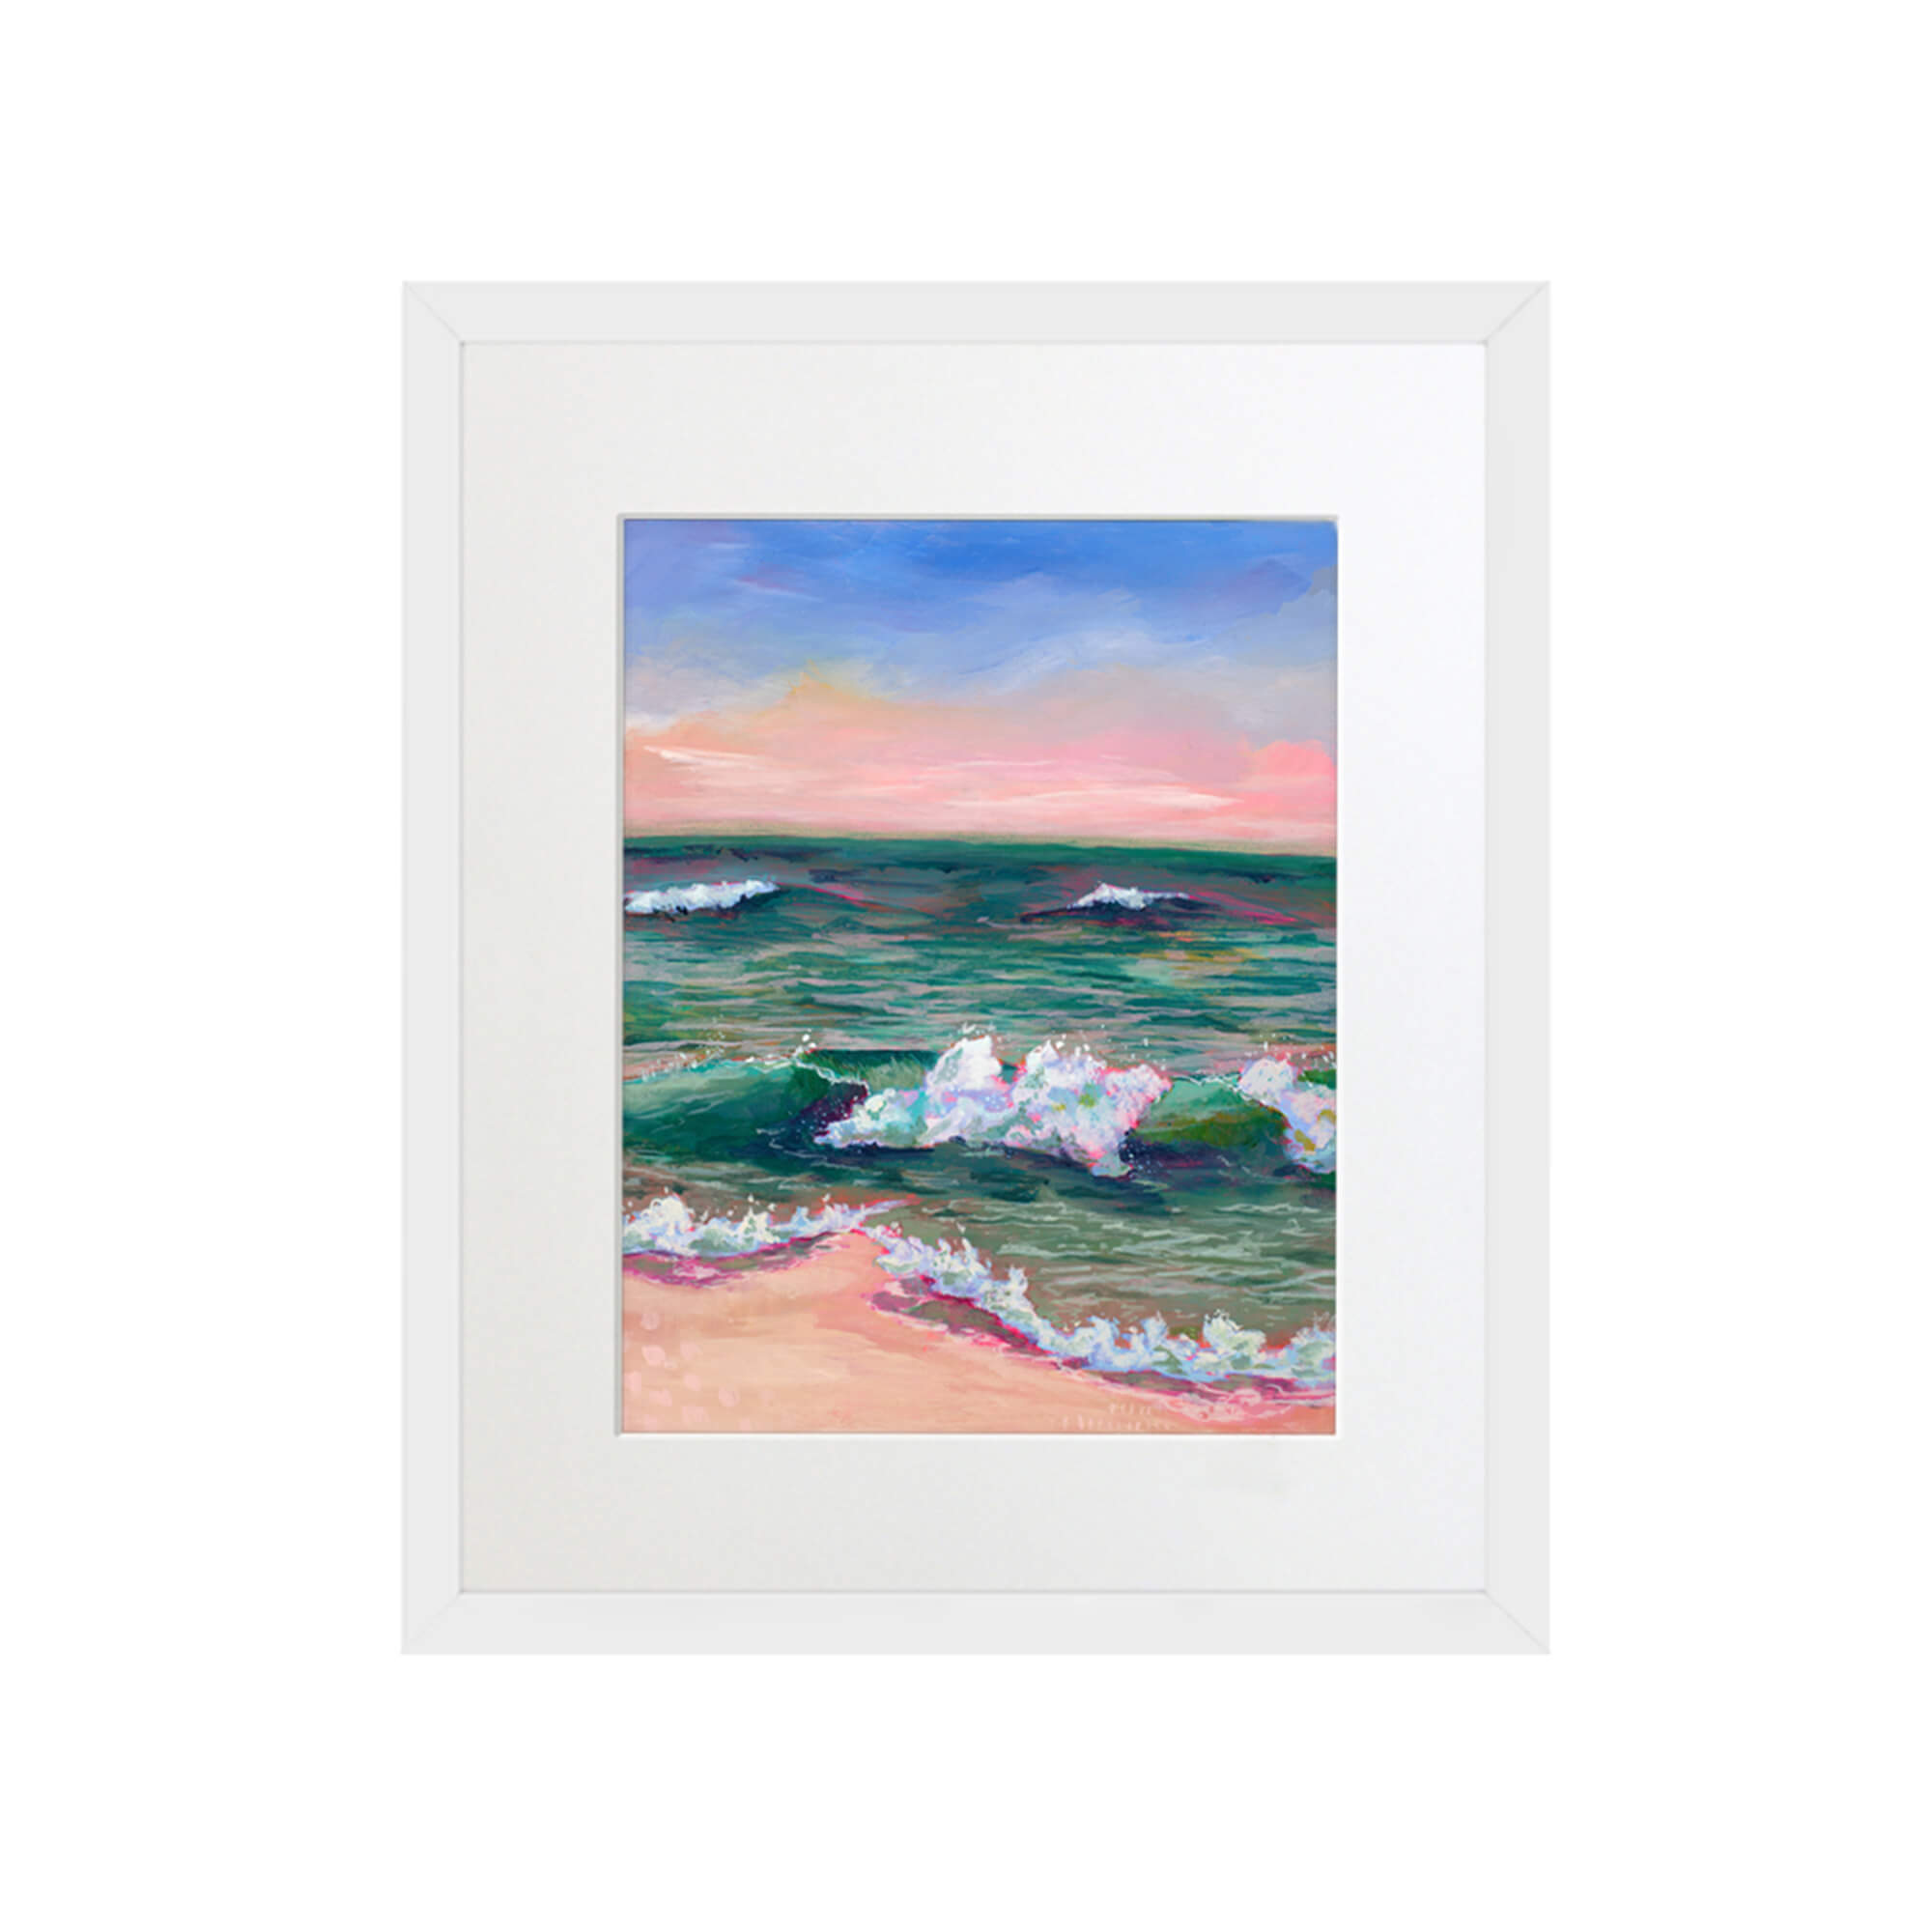 A seascape and horizon with green and pink colors by Hawaii artist Lindsay Wilkins